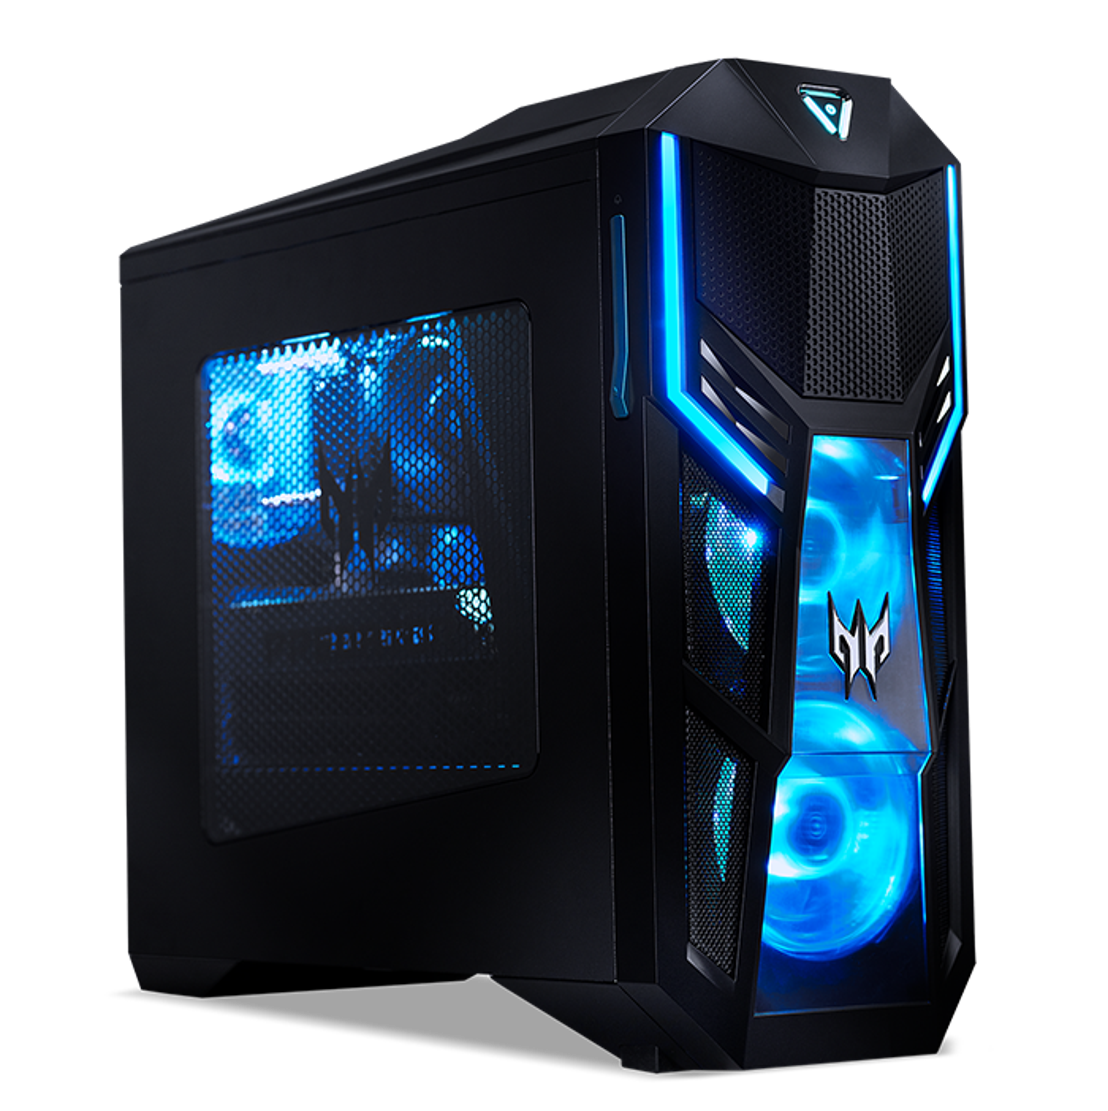 Acer Announces New Predator Orion 5000 Gaming Desktop Massive 43 Inch Gaming Monitor And Refreshed Gadgets